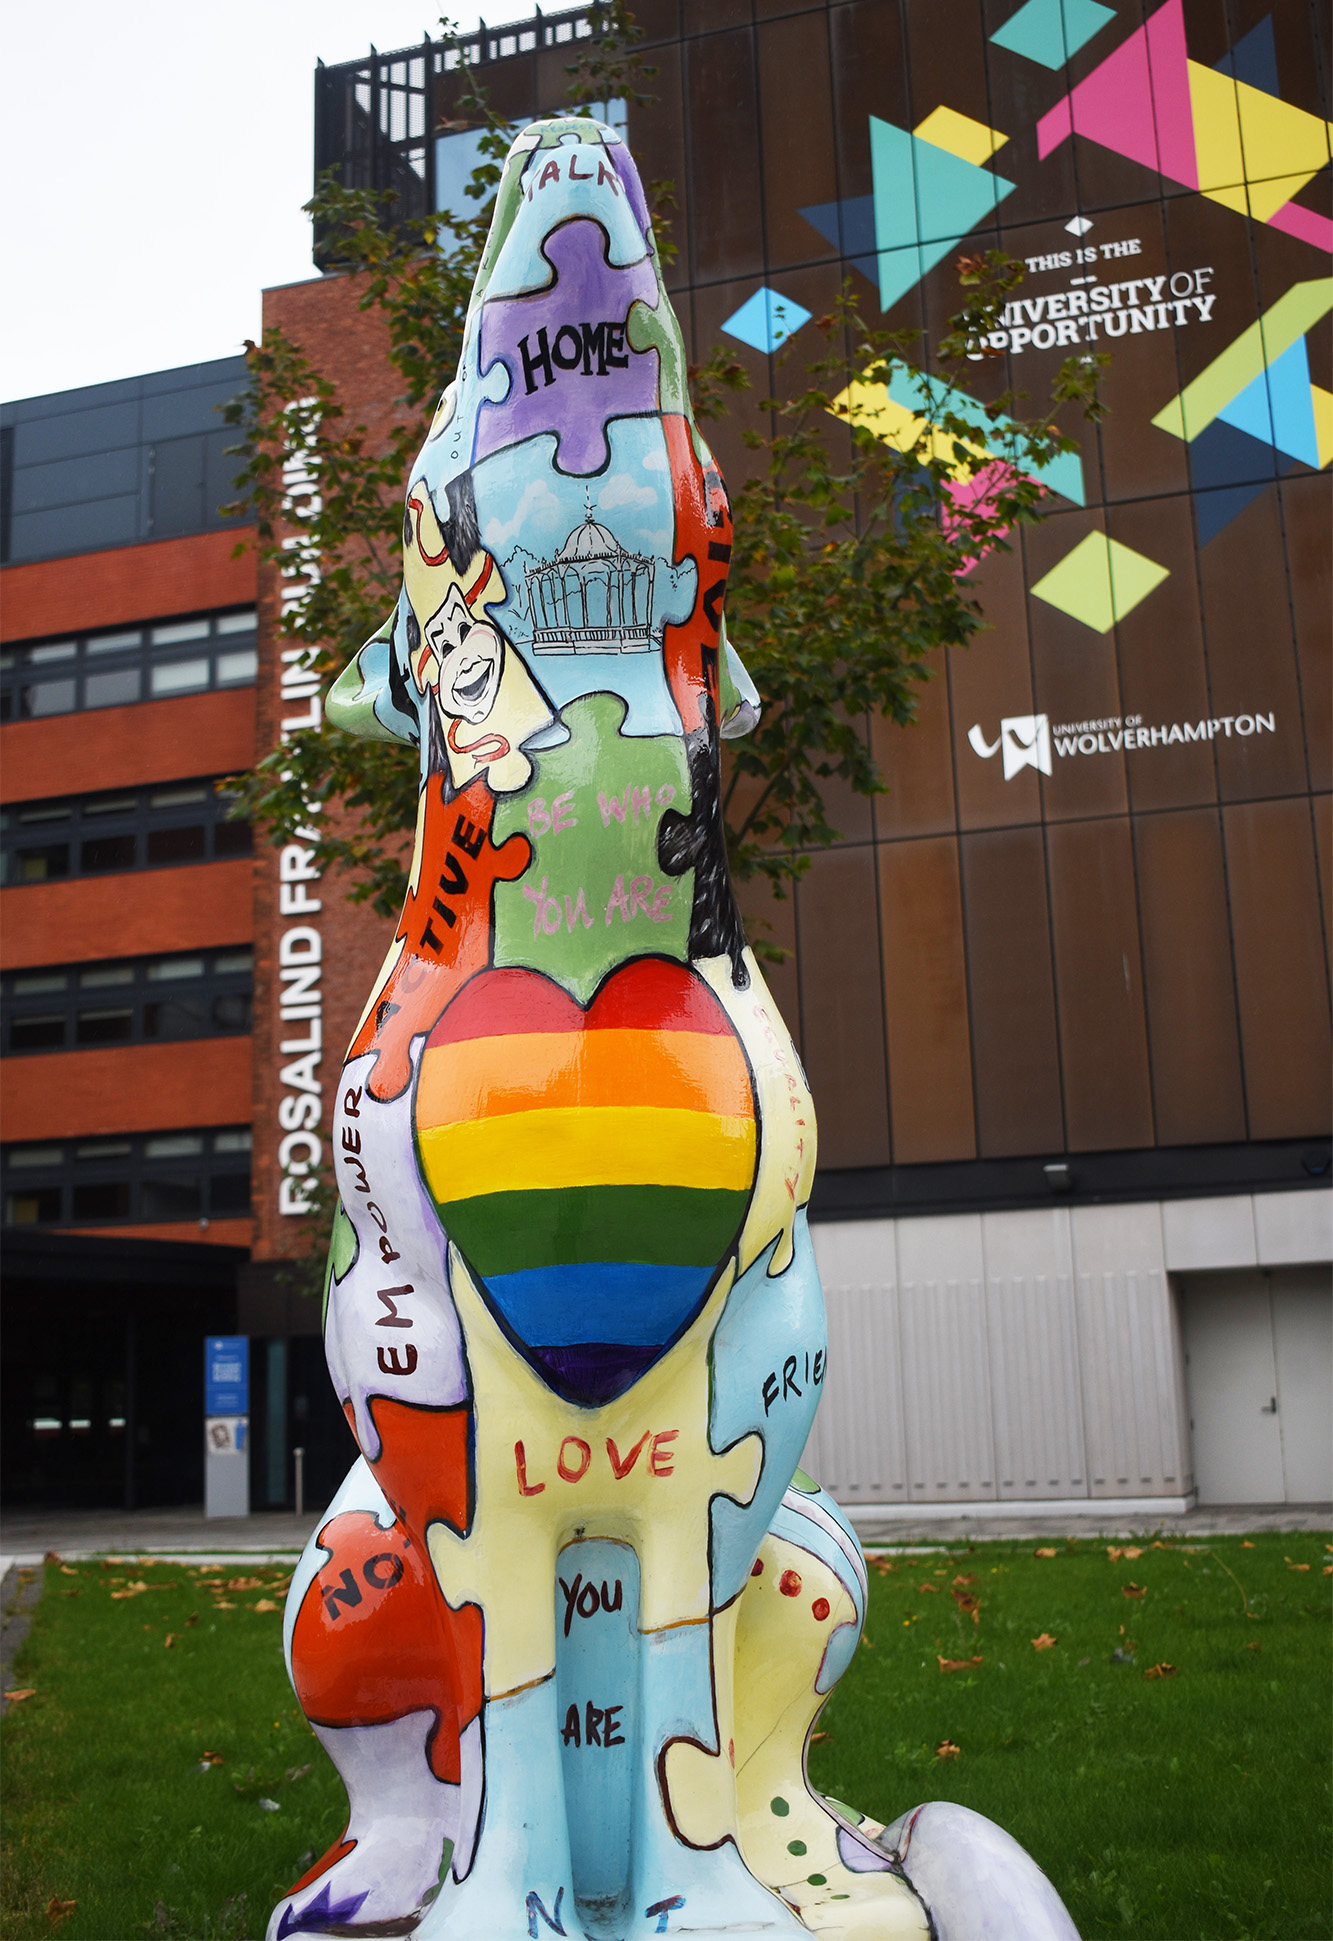 Statue of wolf with painted messages of wellbeing outside Wolverhampton University